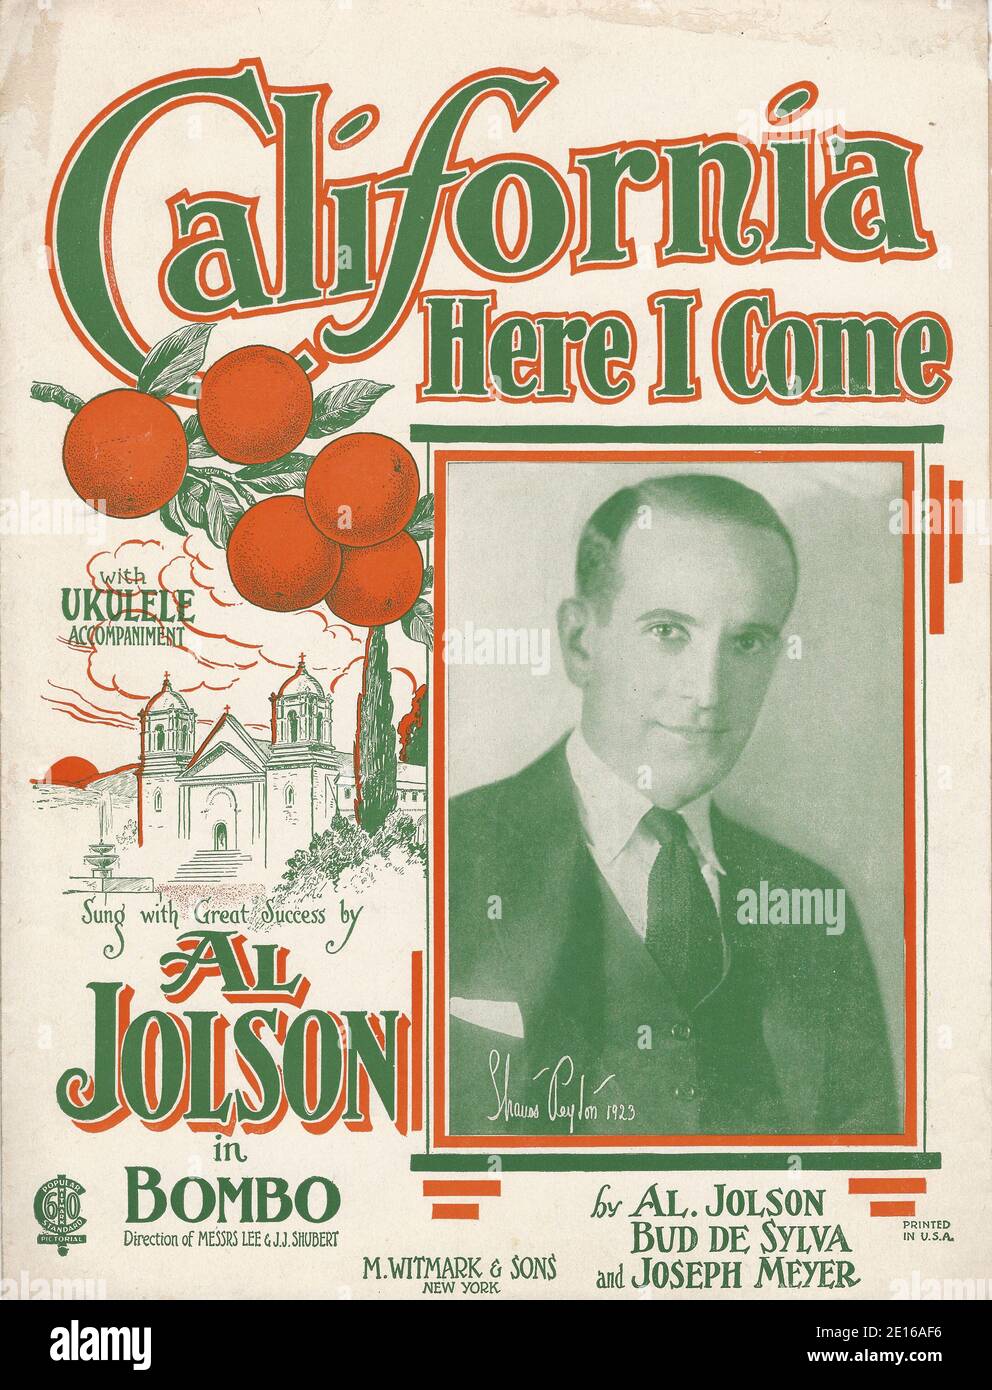 California, Here I Come" Al Jolson Song from "Bombo" 1923 Musical Sheet  Music Cover Stock Photo - Alamy